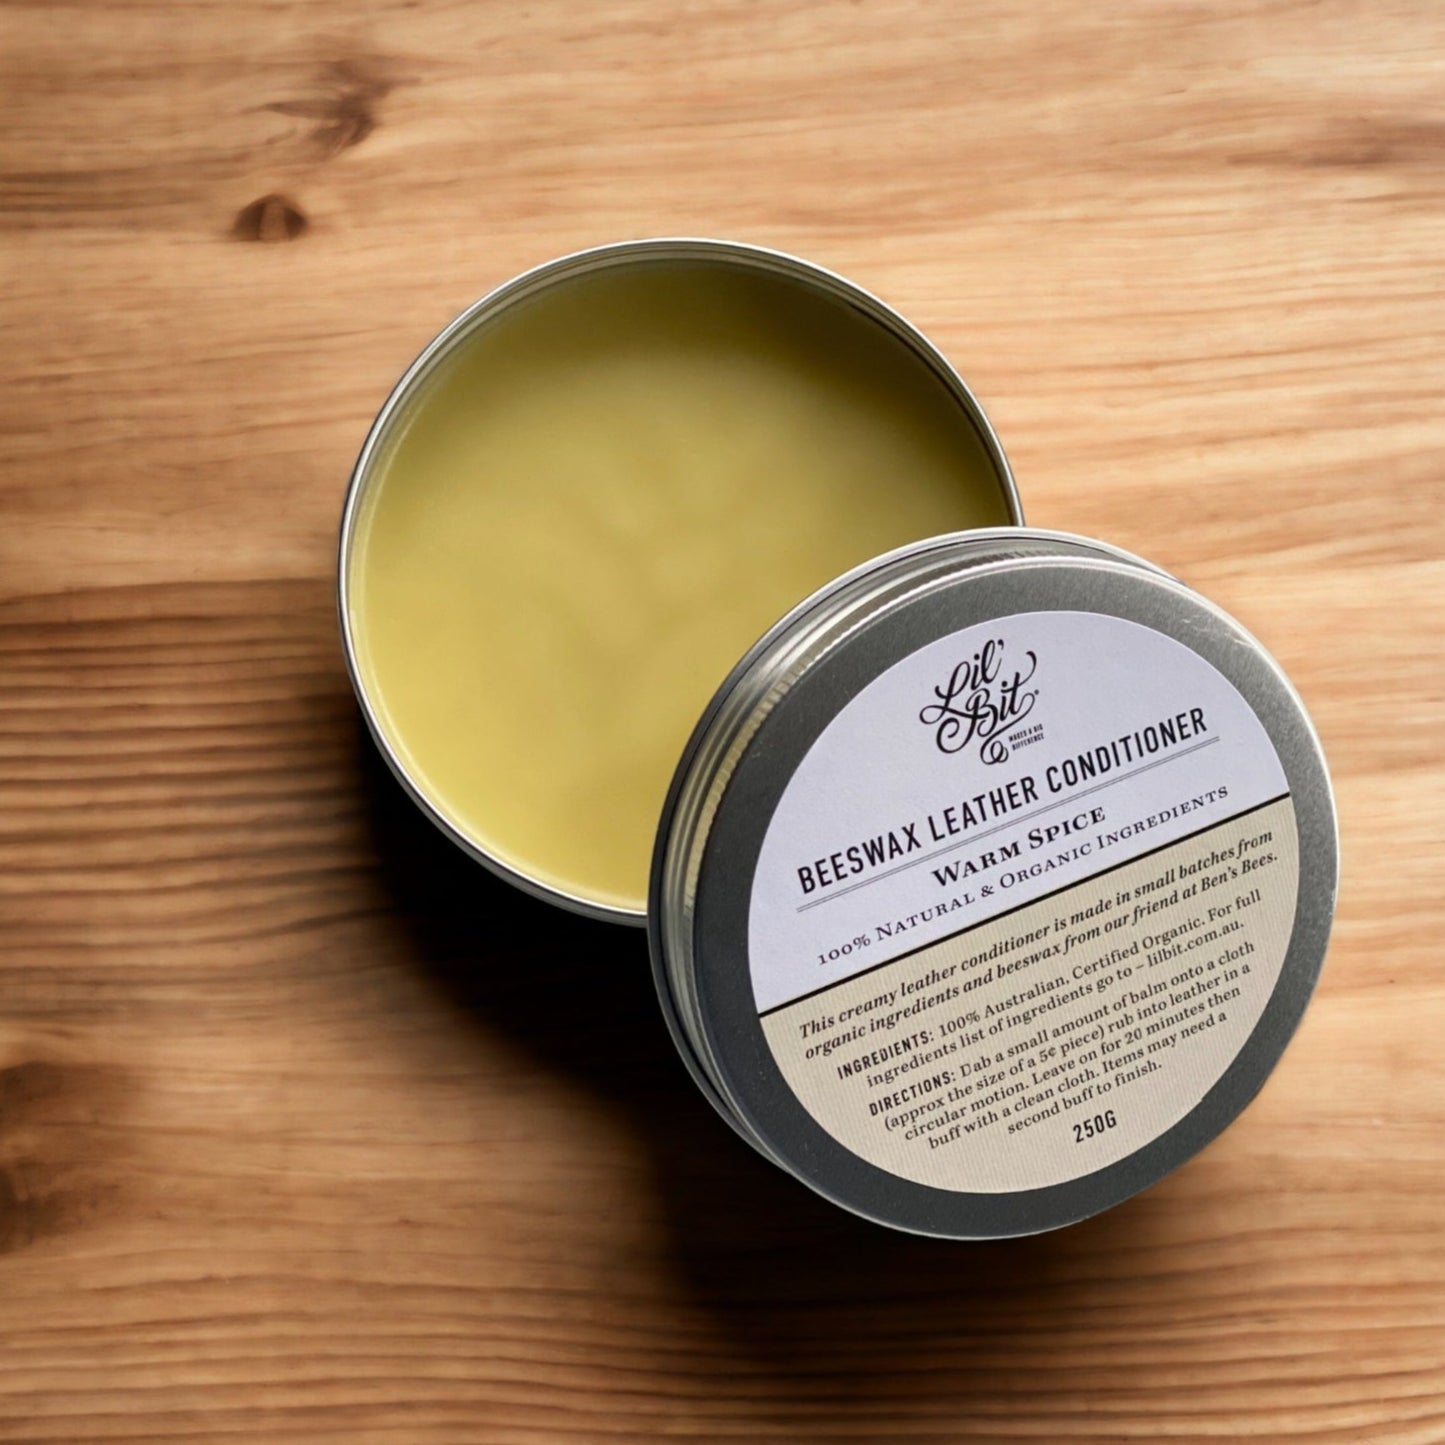 Warm Spice Beeswax Leather Conditioner 250g - Banish